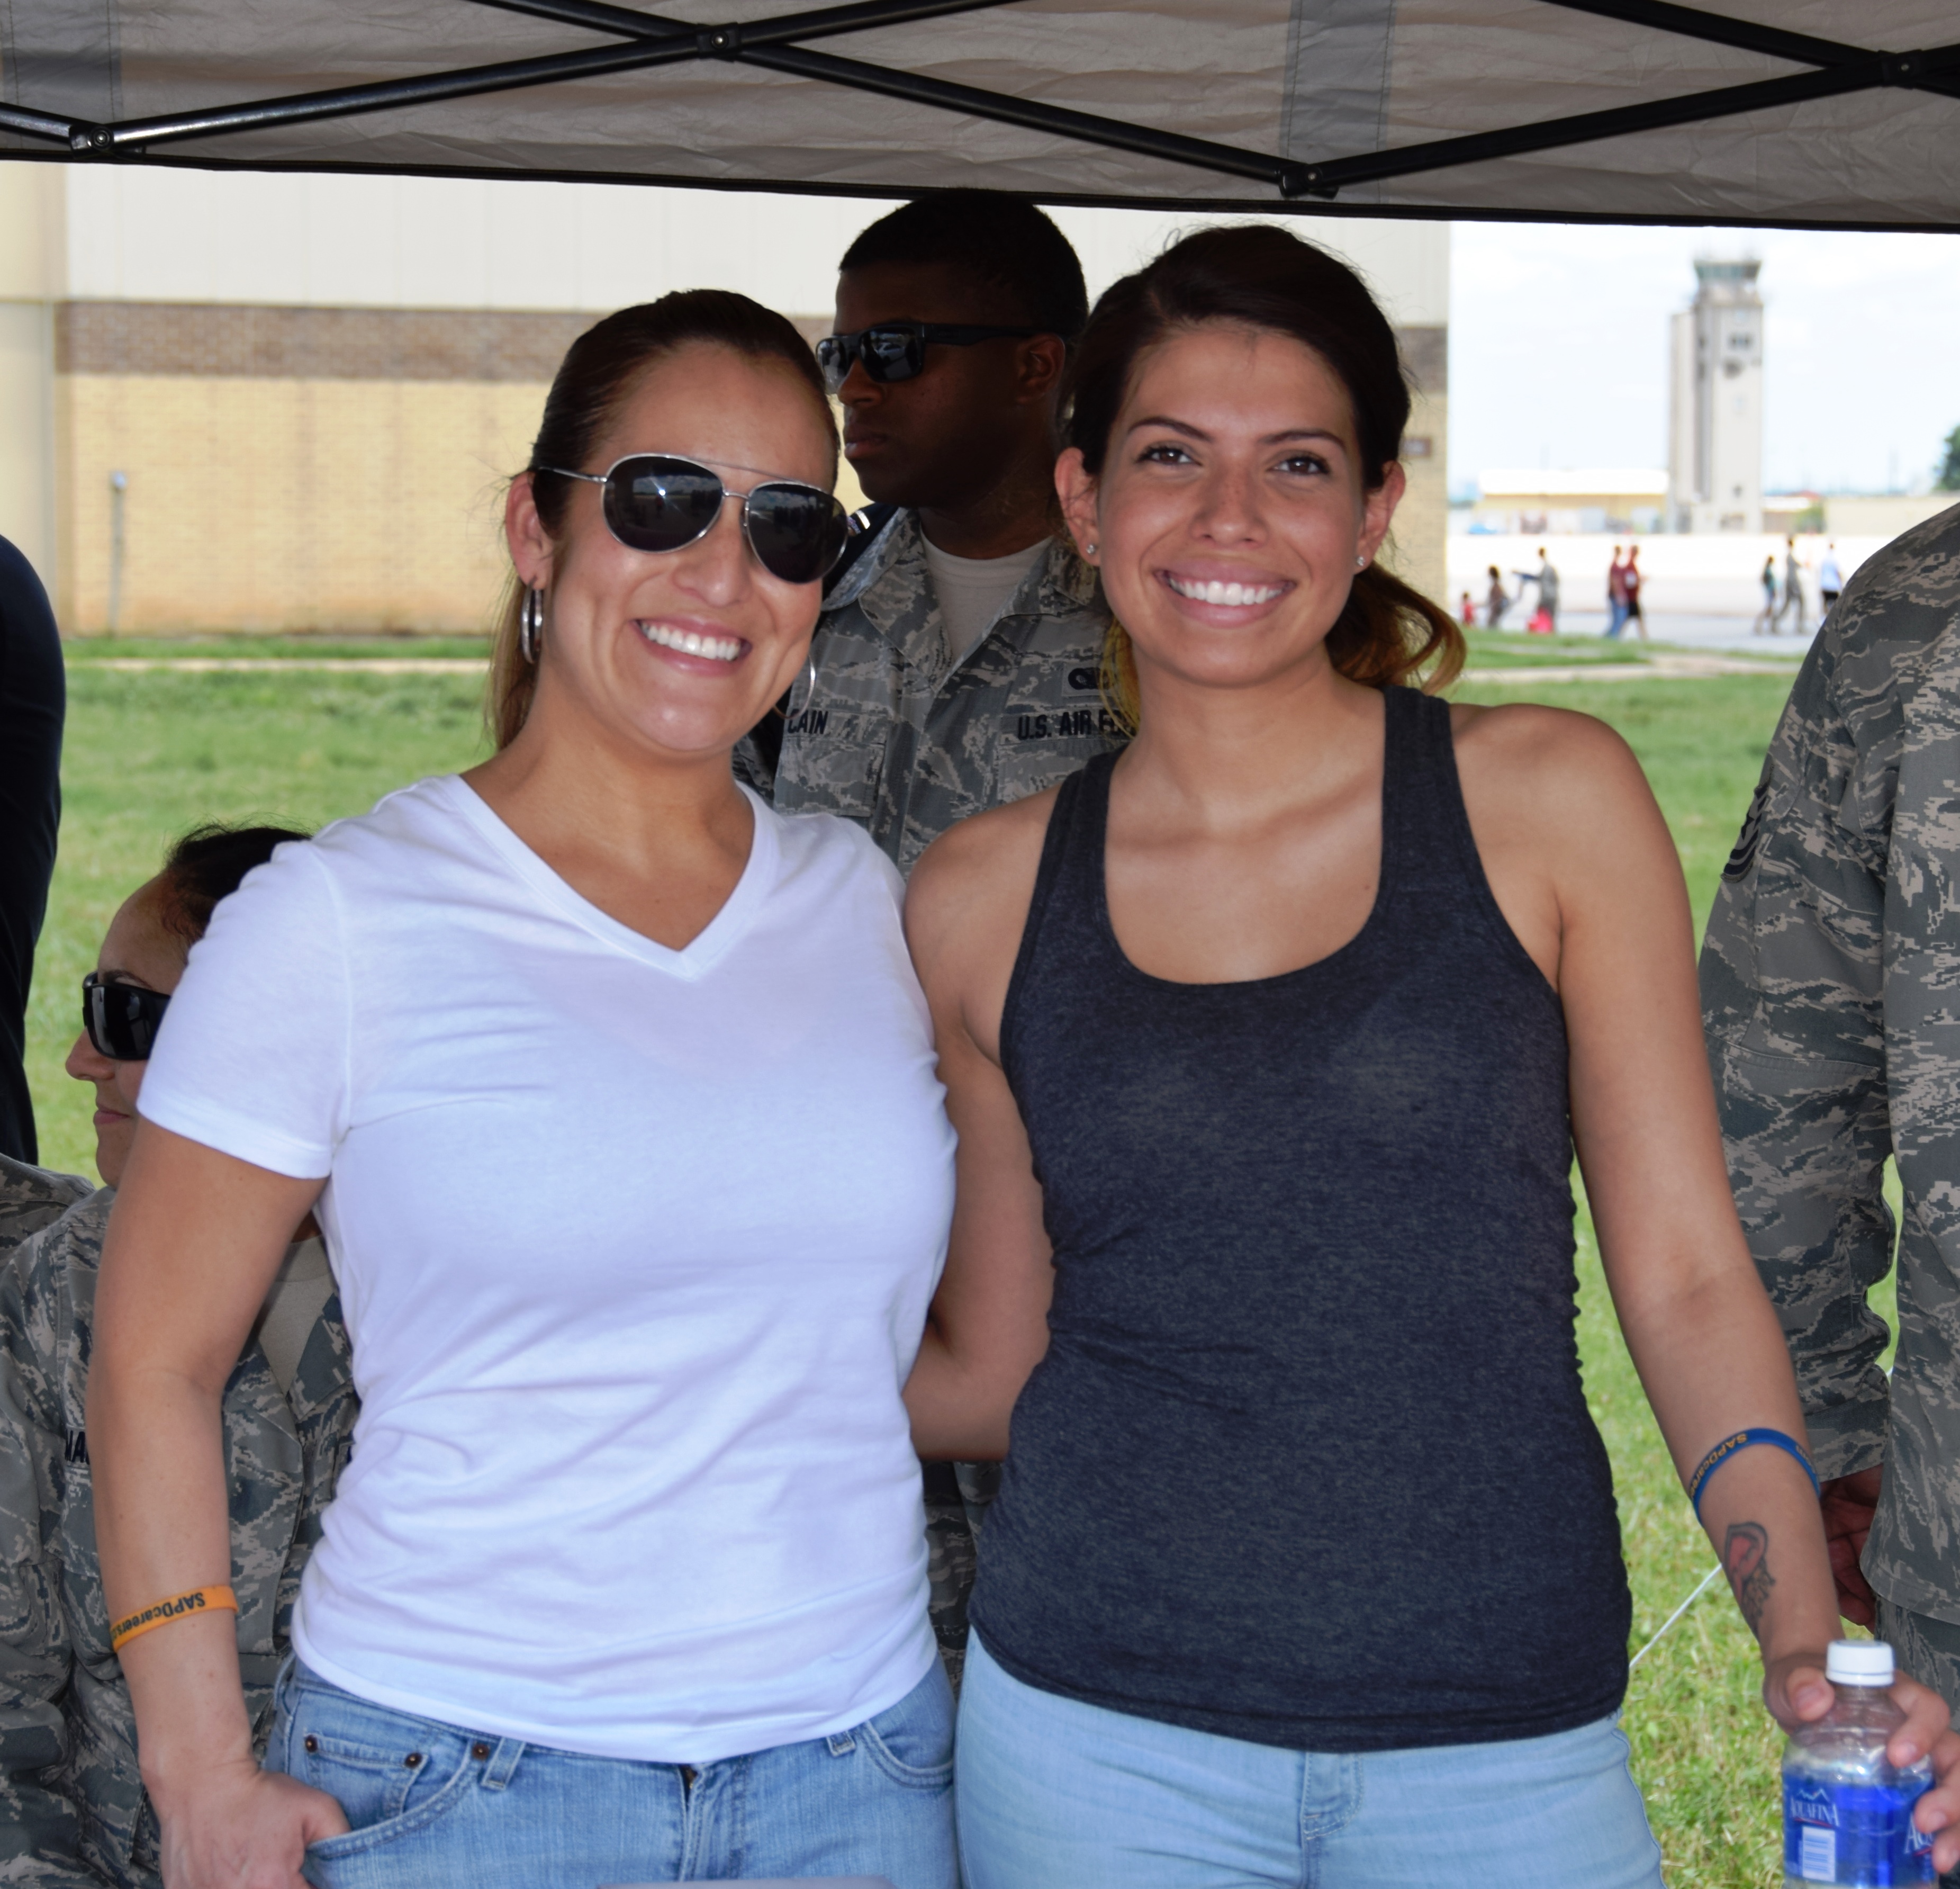 Family members learn about Wing mission at 2015 Family Day